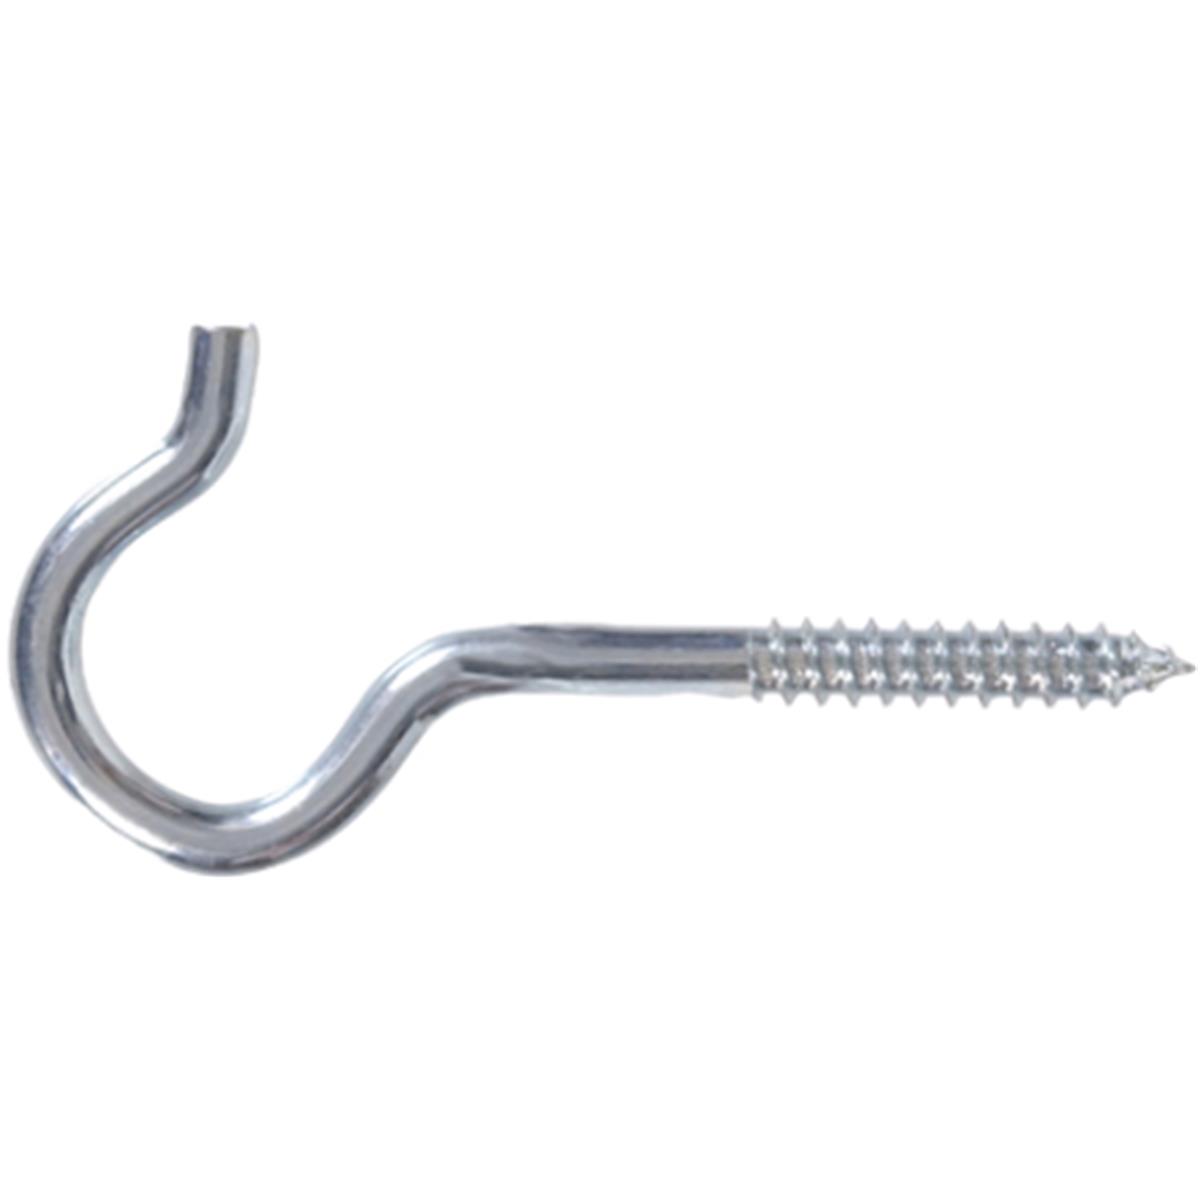 0.243 X 4.12 In. Zinc Plated Screw Hook, Pack Of 10